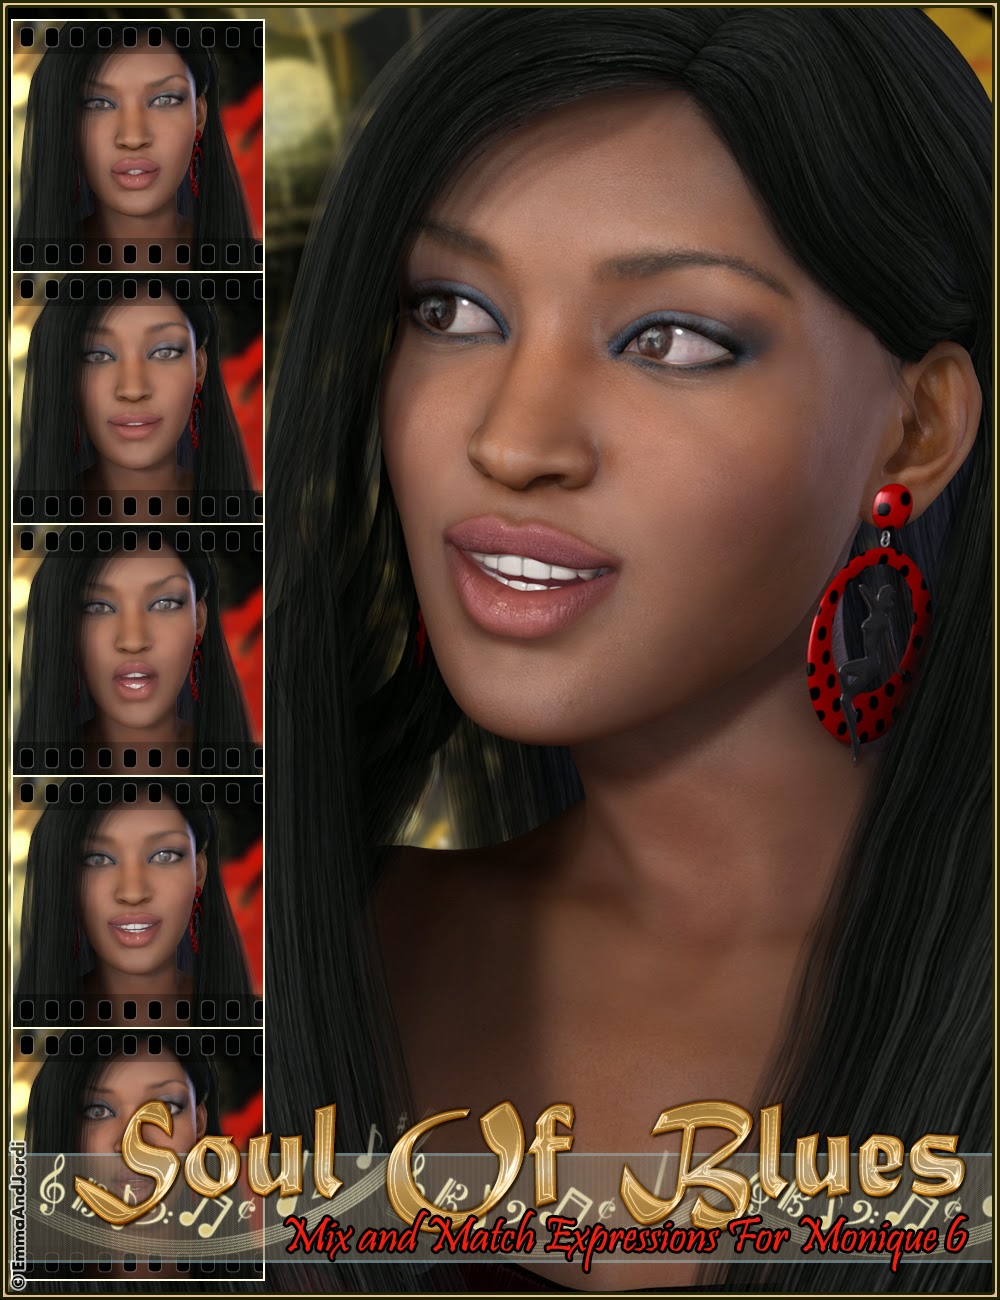 http://www.daz3d.com/soul-of-blues-mix-and-match-expressions-for-monique-6